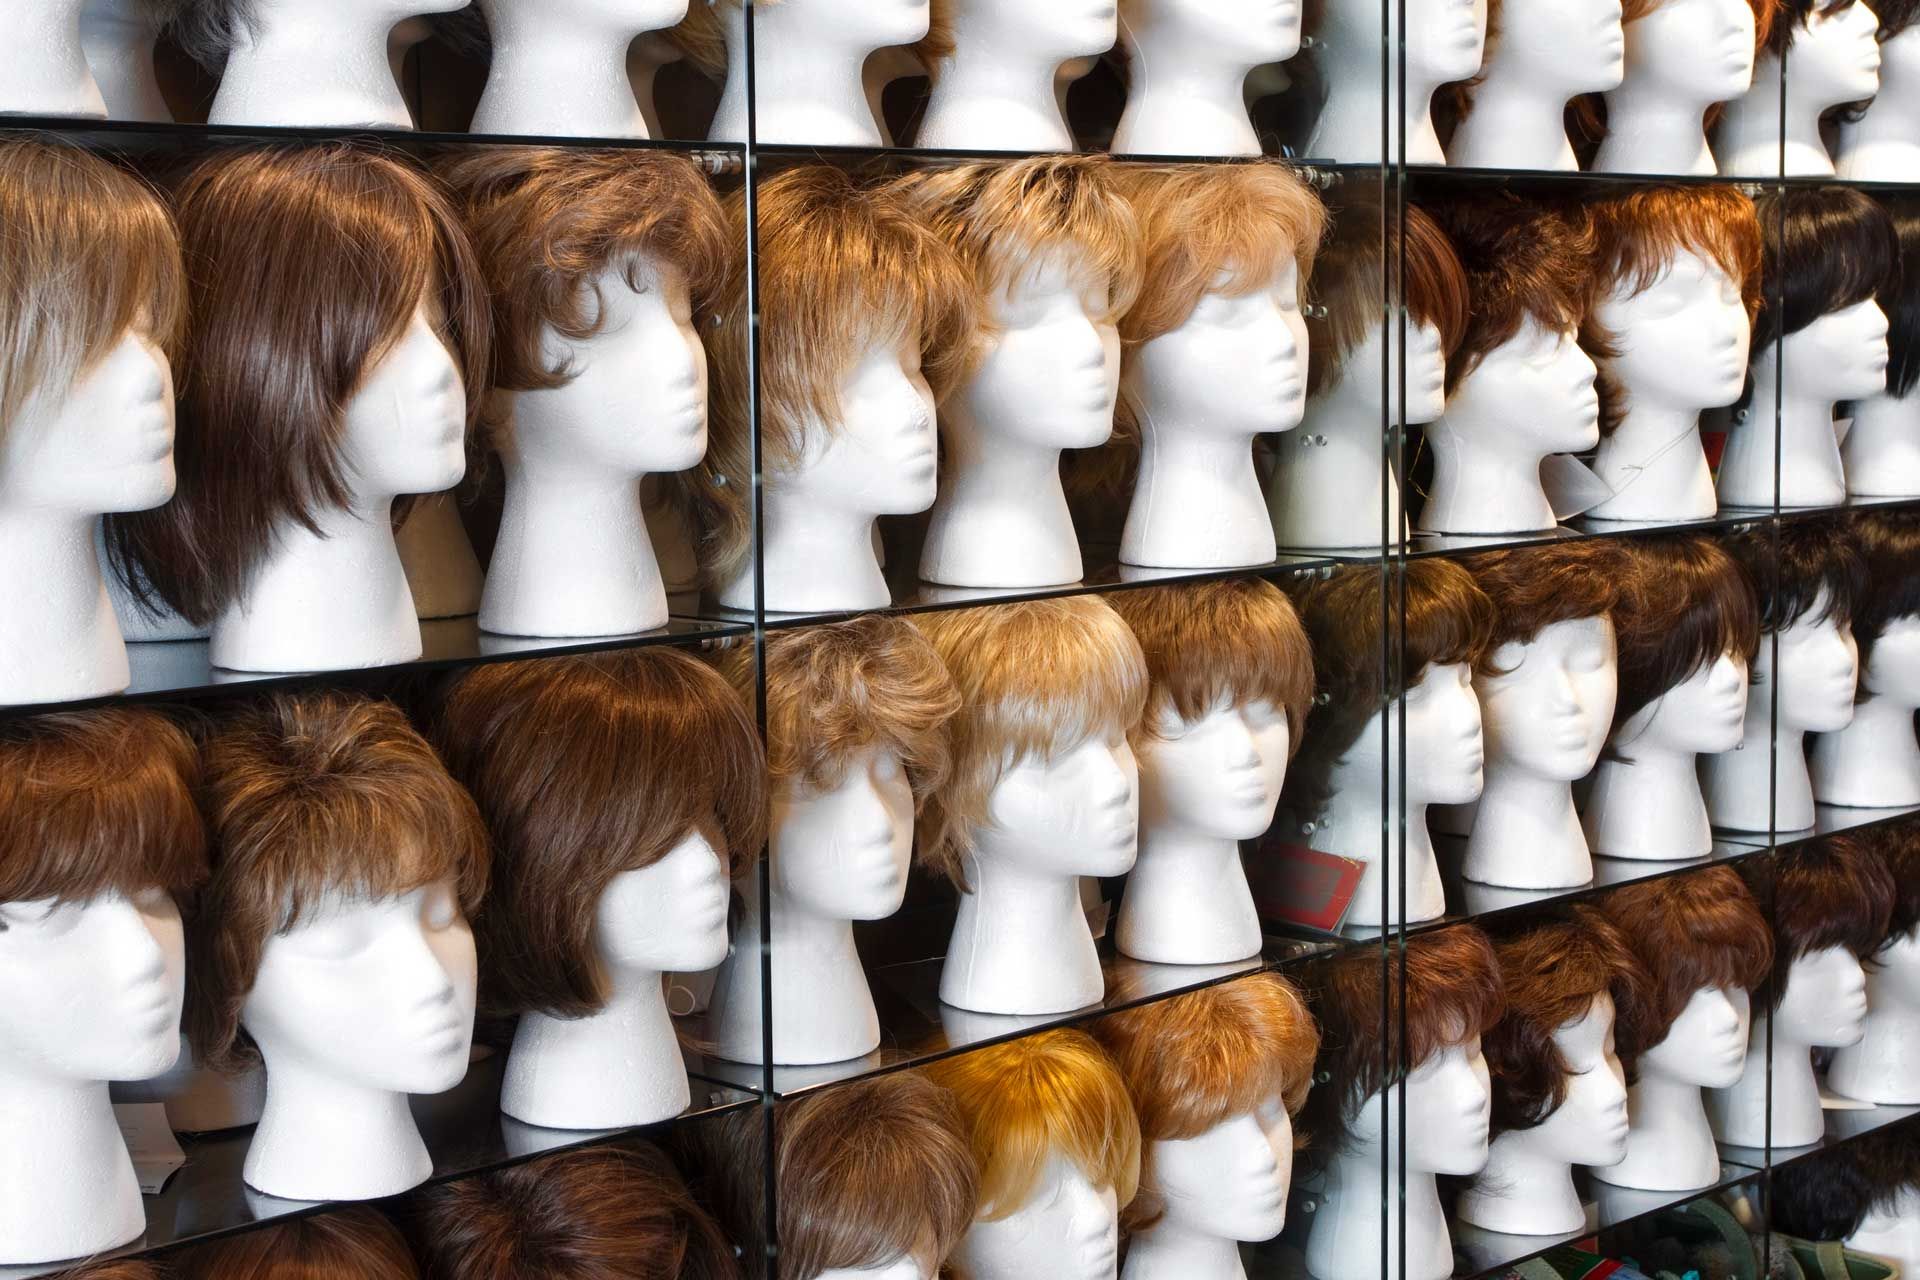 A row of mannequin heads with wigs on them